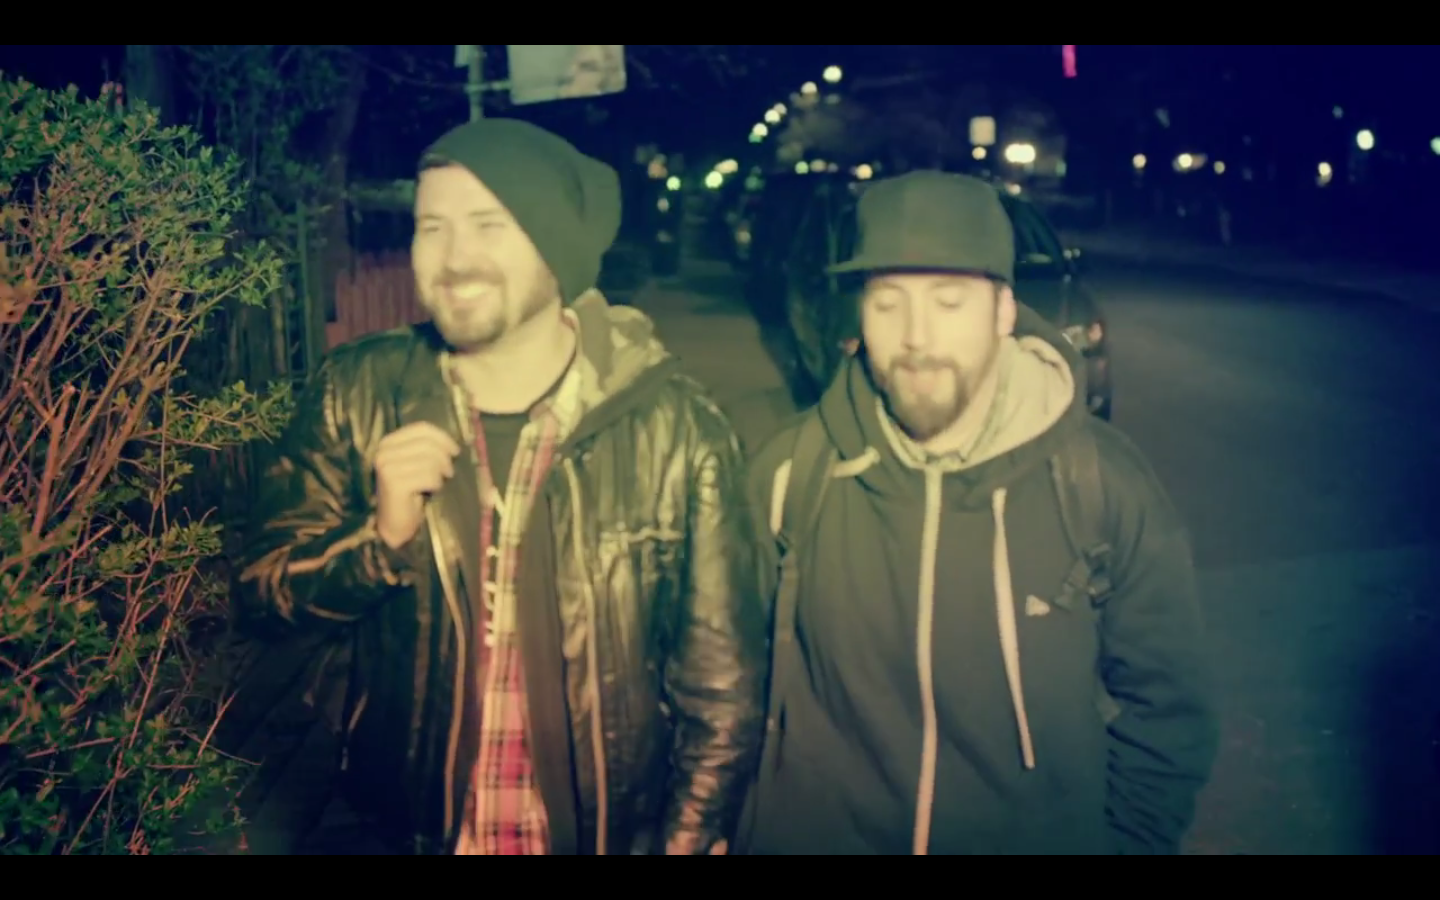 Video: The Extremities – Dial Tones (ft. Ghettosocks, Lushlife & Ambition)